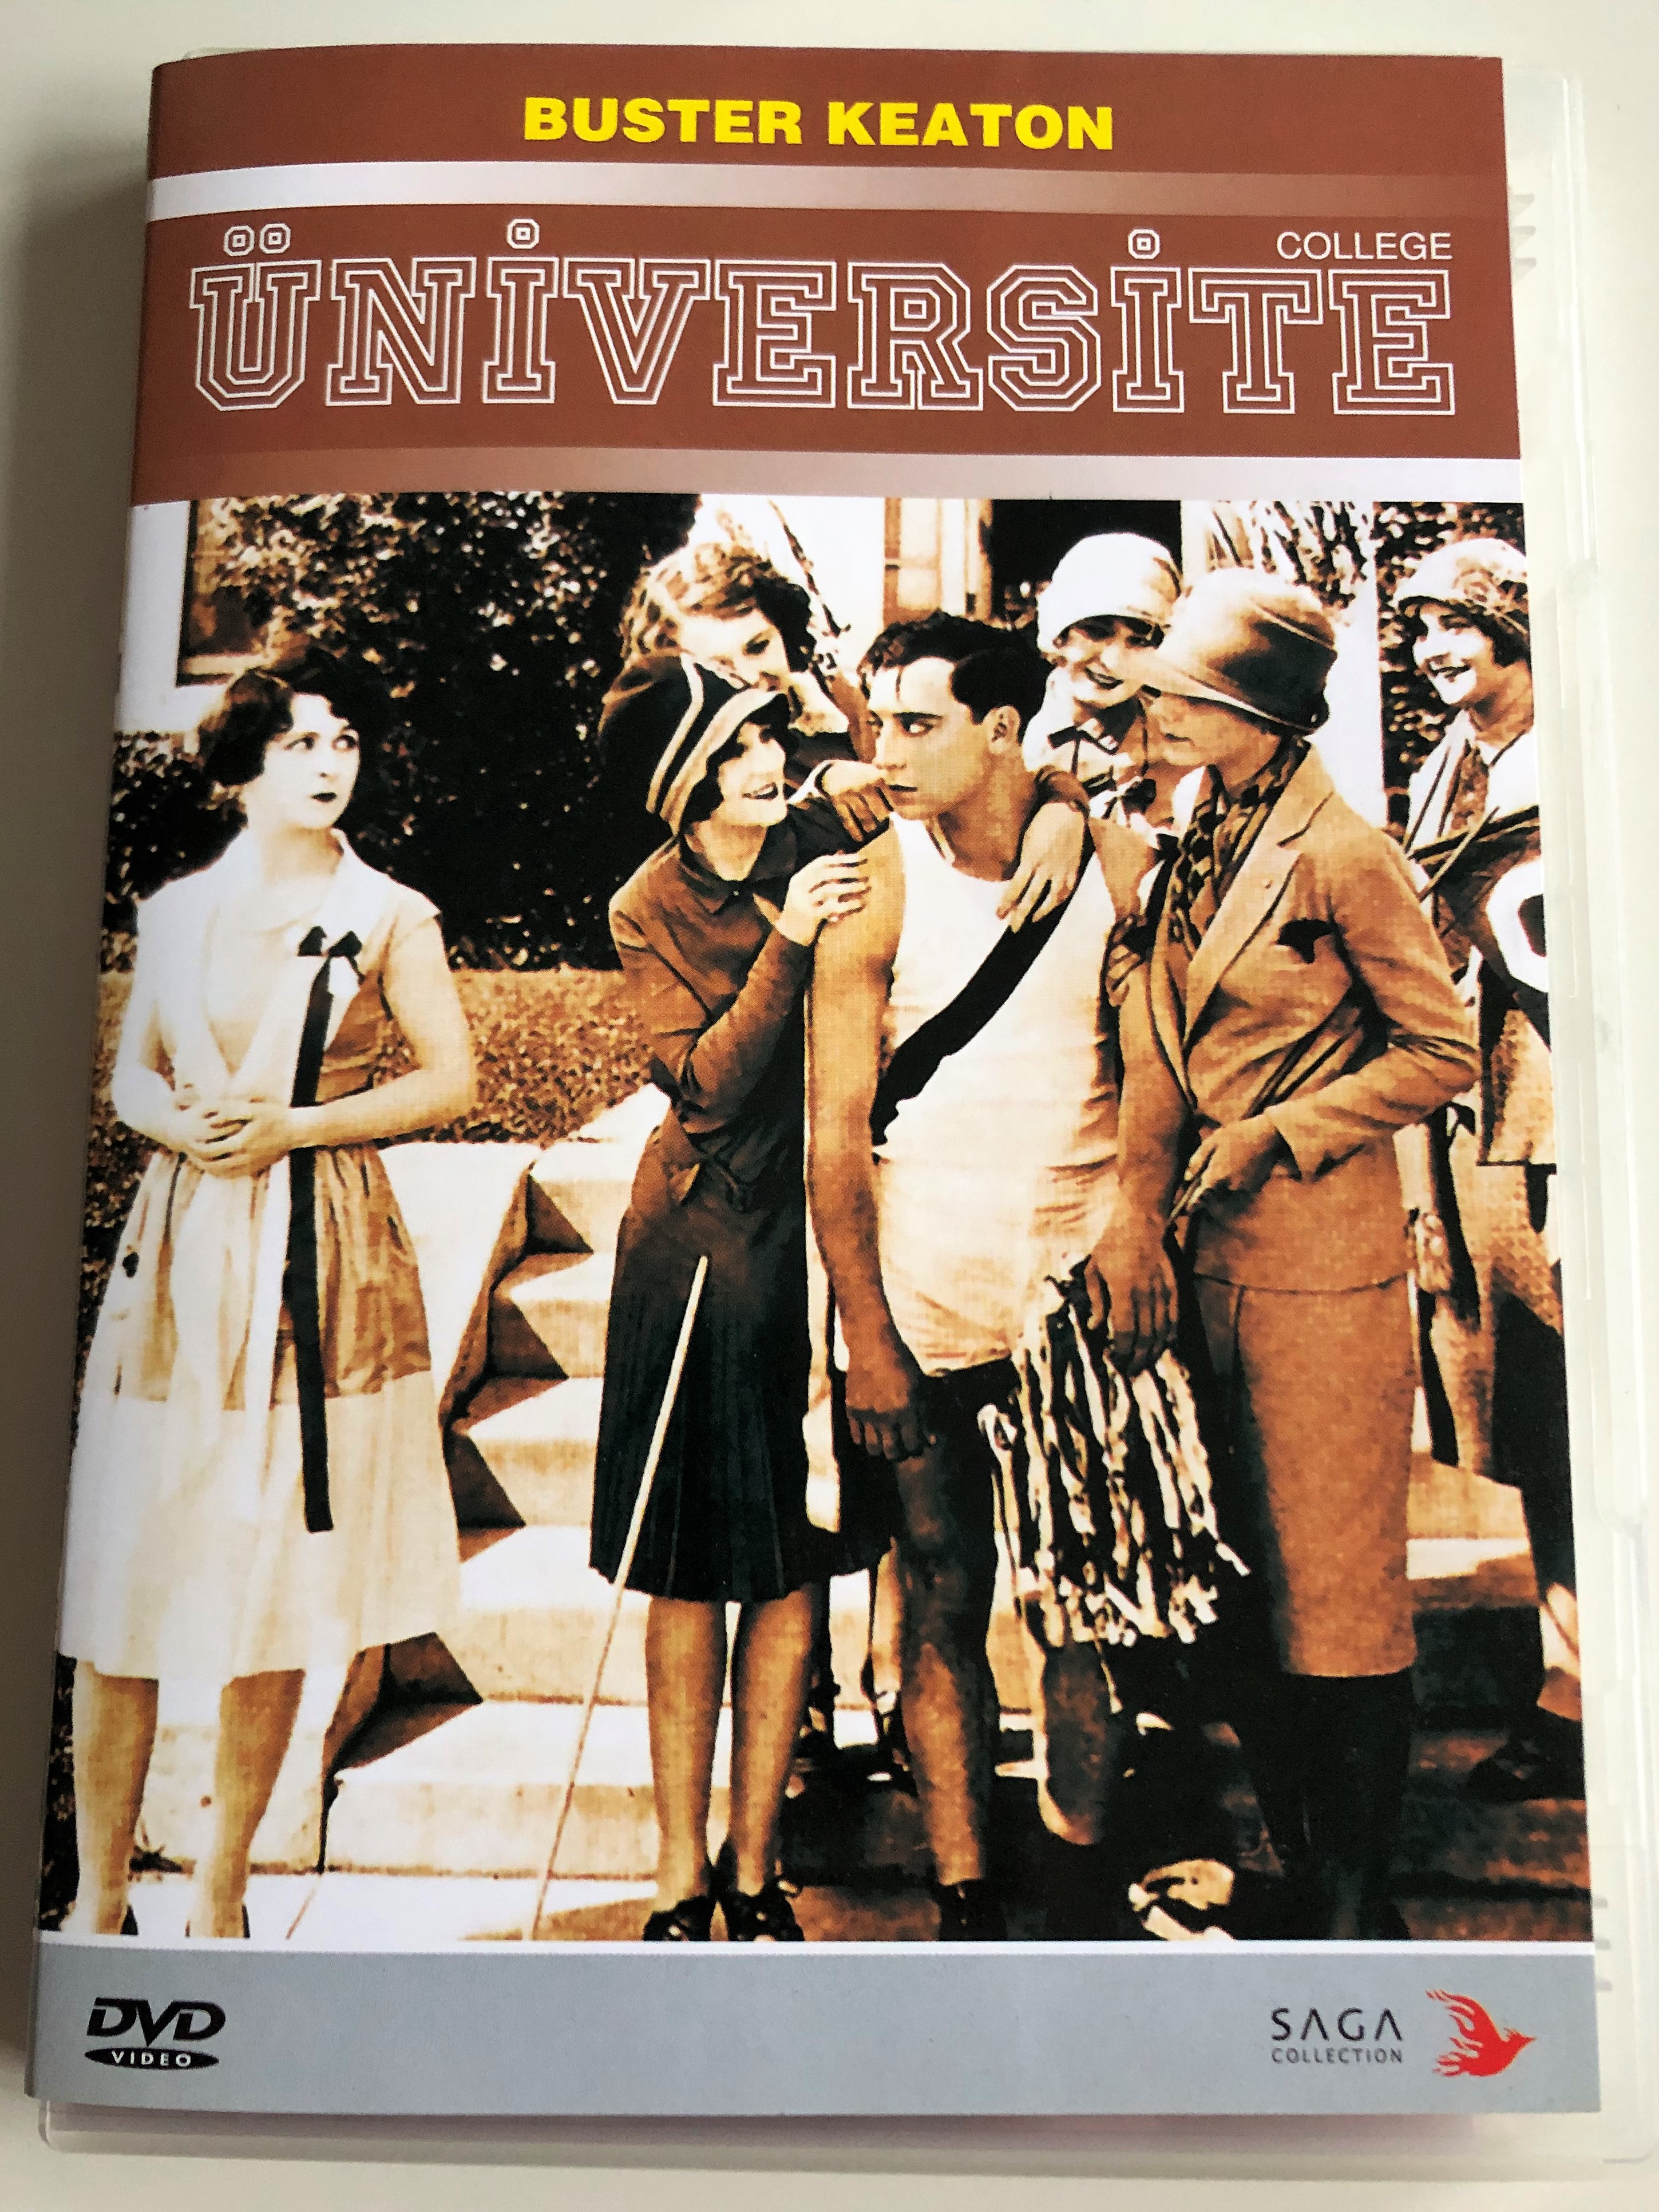 niversite-dvd-2009-college-directed-by-james-w.-horne-buster-keaton-starring-buster-keaton-ann-cornwall-florence-turner-snitz-edwards-1-.jpg